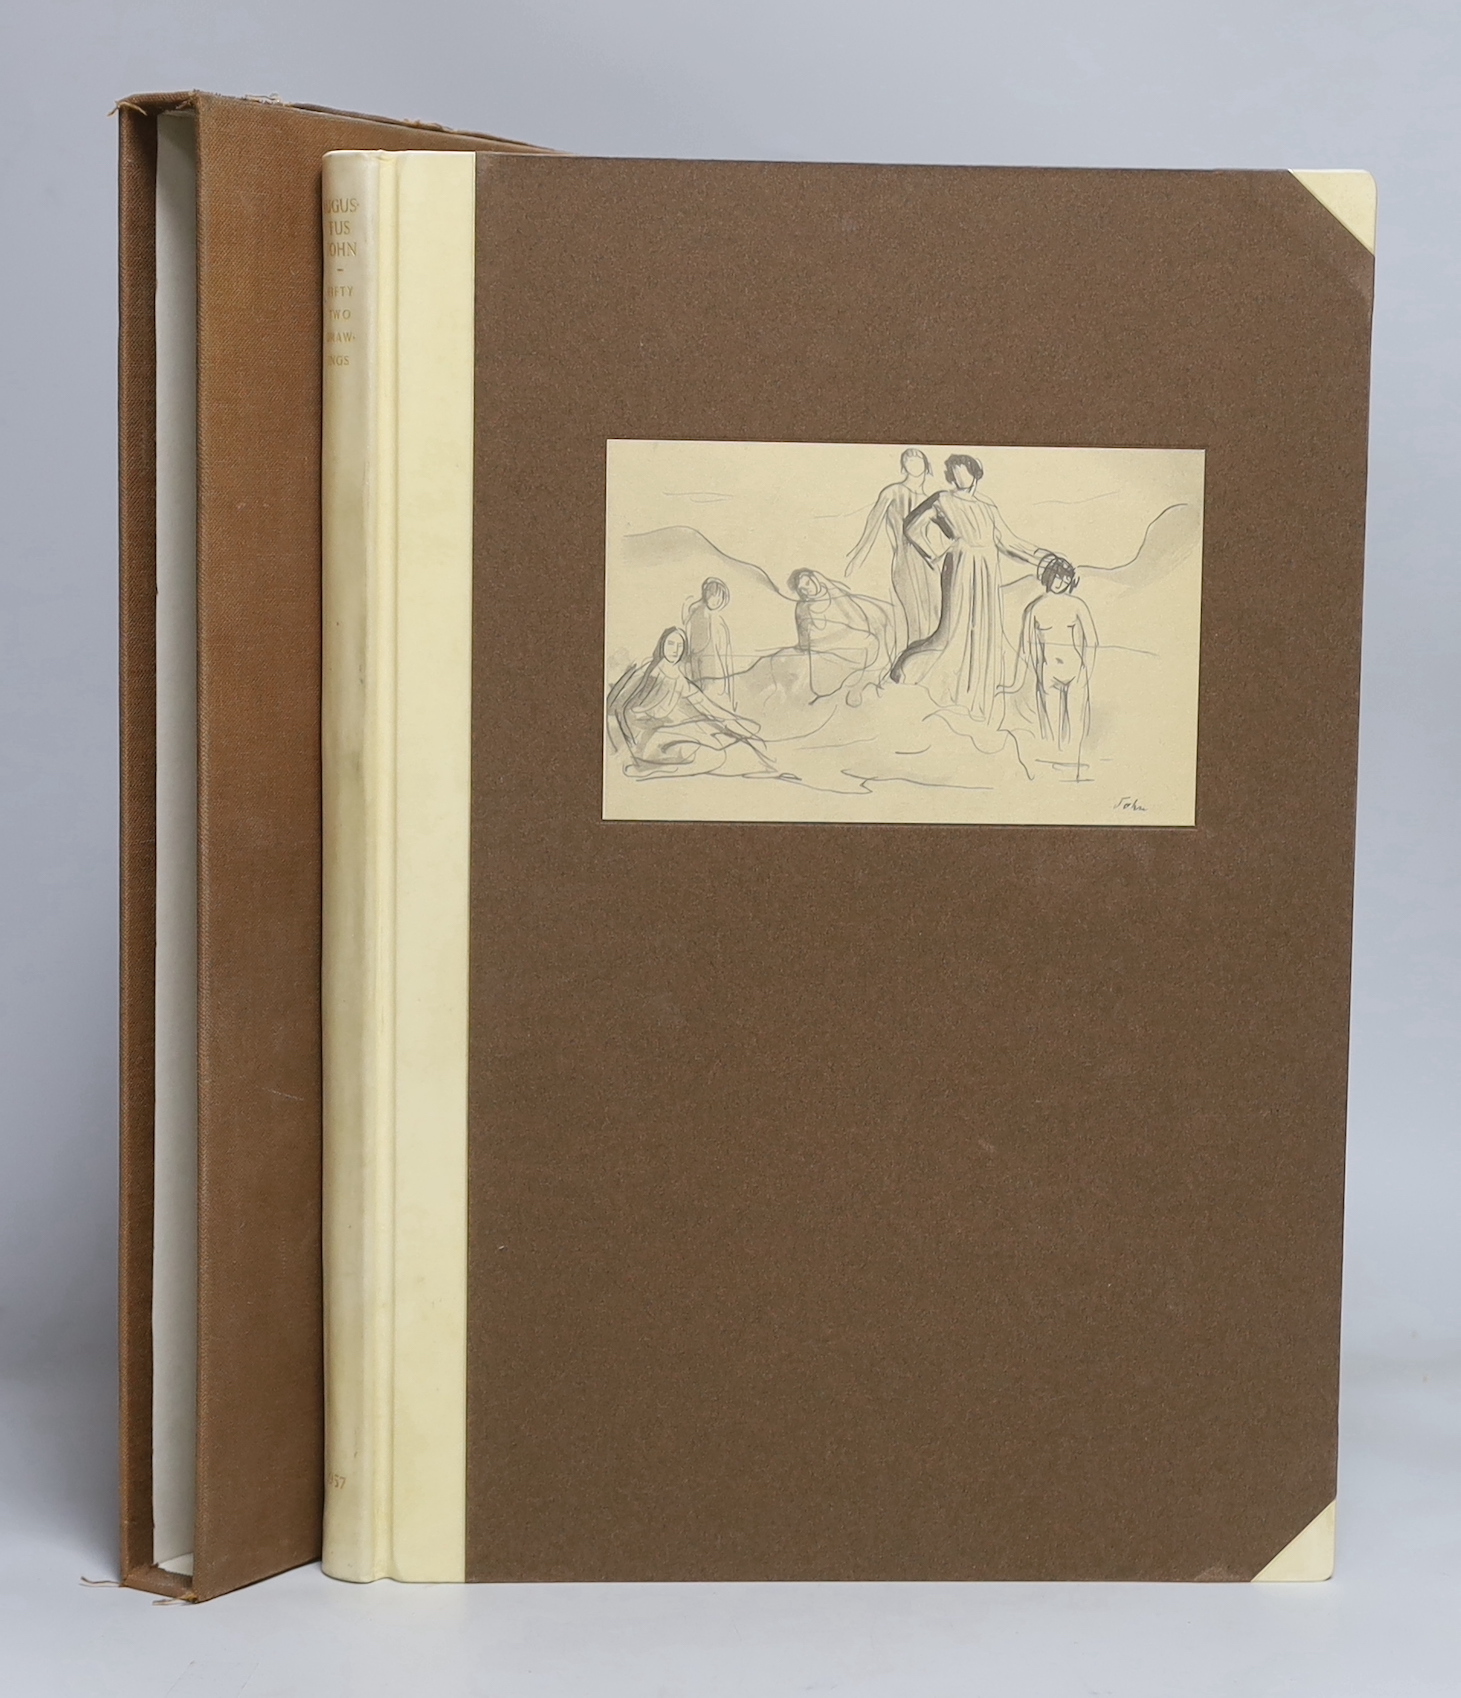 John, Augustus - Fifty-Two Drawings, with an introduction by Lord David Cecil, one of 150 signed by Augustus John and David Cecil, folio, photo-litho offset plates, original half vellum by Zaehnsdorf, George Rainsford, L